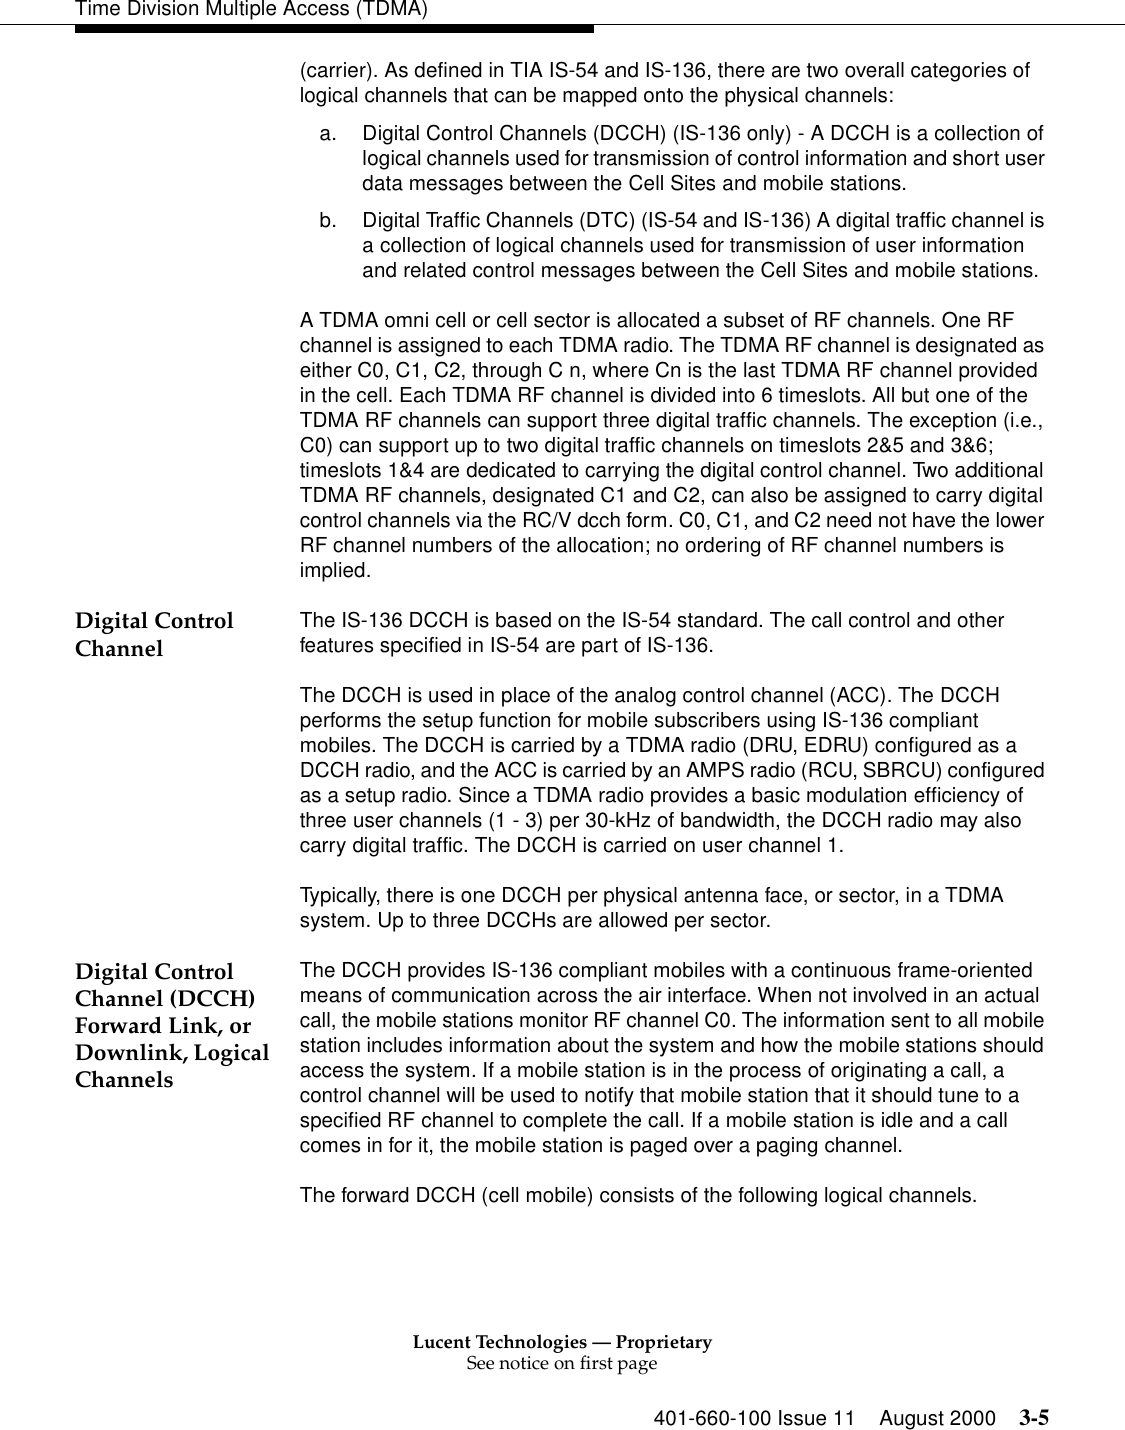 Lucent Technologies — ProprietarySee notice on first page401-660-100 Issue 11 August 2000 3-5Time Division Multiple Access (TDMA)(carrier). As defined in TIA IS-54 and IS-136, there are two overall categories of logical channels that can be mapped onto the physical channels: a. Digital Control Channels (DCCH) (IS-136 only) - A DCCH is a collection of logical channels used for transmission of control information and short user data messages between the Cell Sites and mobile stations. b. Digital Traffic Channels (DTC) (IS-54 and IS-136) A digital traffic channel is a collection of logical channels used for transmission of user information and related control messages between the Cell Sites and mobile stations. A TDMA omni cell or cell sector is allocated a subset of RF channels. One RF channel is assigned to each TDMA radio. The TDMA RF channel is designated as either C0, C1, C2, through C n, where Cn is the last TDMA RF channel provided in the cell. Each TDMA RF channel is divided into 6 timeslots. All but one of the TDMA RF channels can support three digital traffic channels. The exception (i.e., C0) can support up to two digital traffic channels on timeslots 2&amp;5 and 3&amp;6; timeslots 1&amp;4 are dedicated to carrying the digital control channel. Two additional TDMA RF channels, designated C1 and C2, can also be assigned to carry digital control channels via the RC/V dcch form. C0, C1, and C2 need not have the lower RF channel numbers of the allocation; no ordering of RF channel numbers is implied. Digital Control Channel The IS-136 DCCH is based on the IS-54 standard. The call control and other features specified in IS-54 are part of IS-136.The DCCH is used in place of the analog control channel (ACC). The DCCH performs the setup function for mobile subscribers using IS-136 compliant mobiles. The DCCH is carried by a TDMA radio (DRU, EDRU) configured as a DCCH radio, and the ACC is carried by an AMPS radio (RCU, SBRCU) configured as a setup radio. Since a TDMA radio provides a basic modulation efficiency of three user channels (1 - 3) per 30-kHz of bandwidth, the DCCH radio may also carry digital traffic. The DCCH is carried on user channel 1. Typically, there is one DCCH per physical antenna face, or sector, in a TDMA system. Up to three DCCHs are allowed per sector. Digital Control Channel (DCCH) Forward Link, orDownlink, Logical ChannelsThe DCCH provides IS-136 compliant mobiles with a continuous frame-oriented means of communication across the air interface. When not involved in an actual call, the mobile stations monitor RF channel C0. The information sent to all mobile station includes information about the system and how the mobile stations should access the system. If a mobile station is in the process of originating a call, a control channel will be used to notify that mobile station that it should tune to a specified RF channel to complete the call. If a mobile station is idle and a call comes in for it, the mobile station is paged over a paging channel. The forward DCCH (cell mobile) consists of the following logical channels.